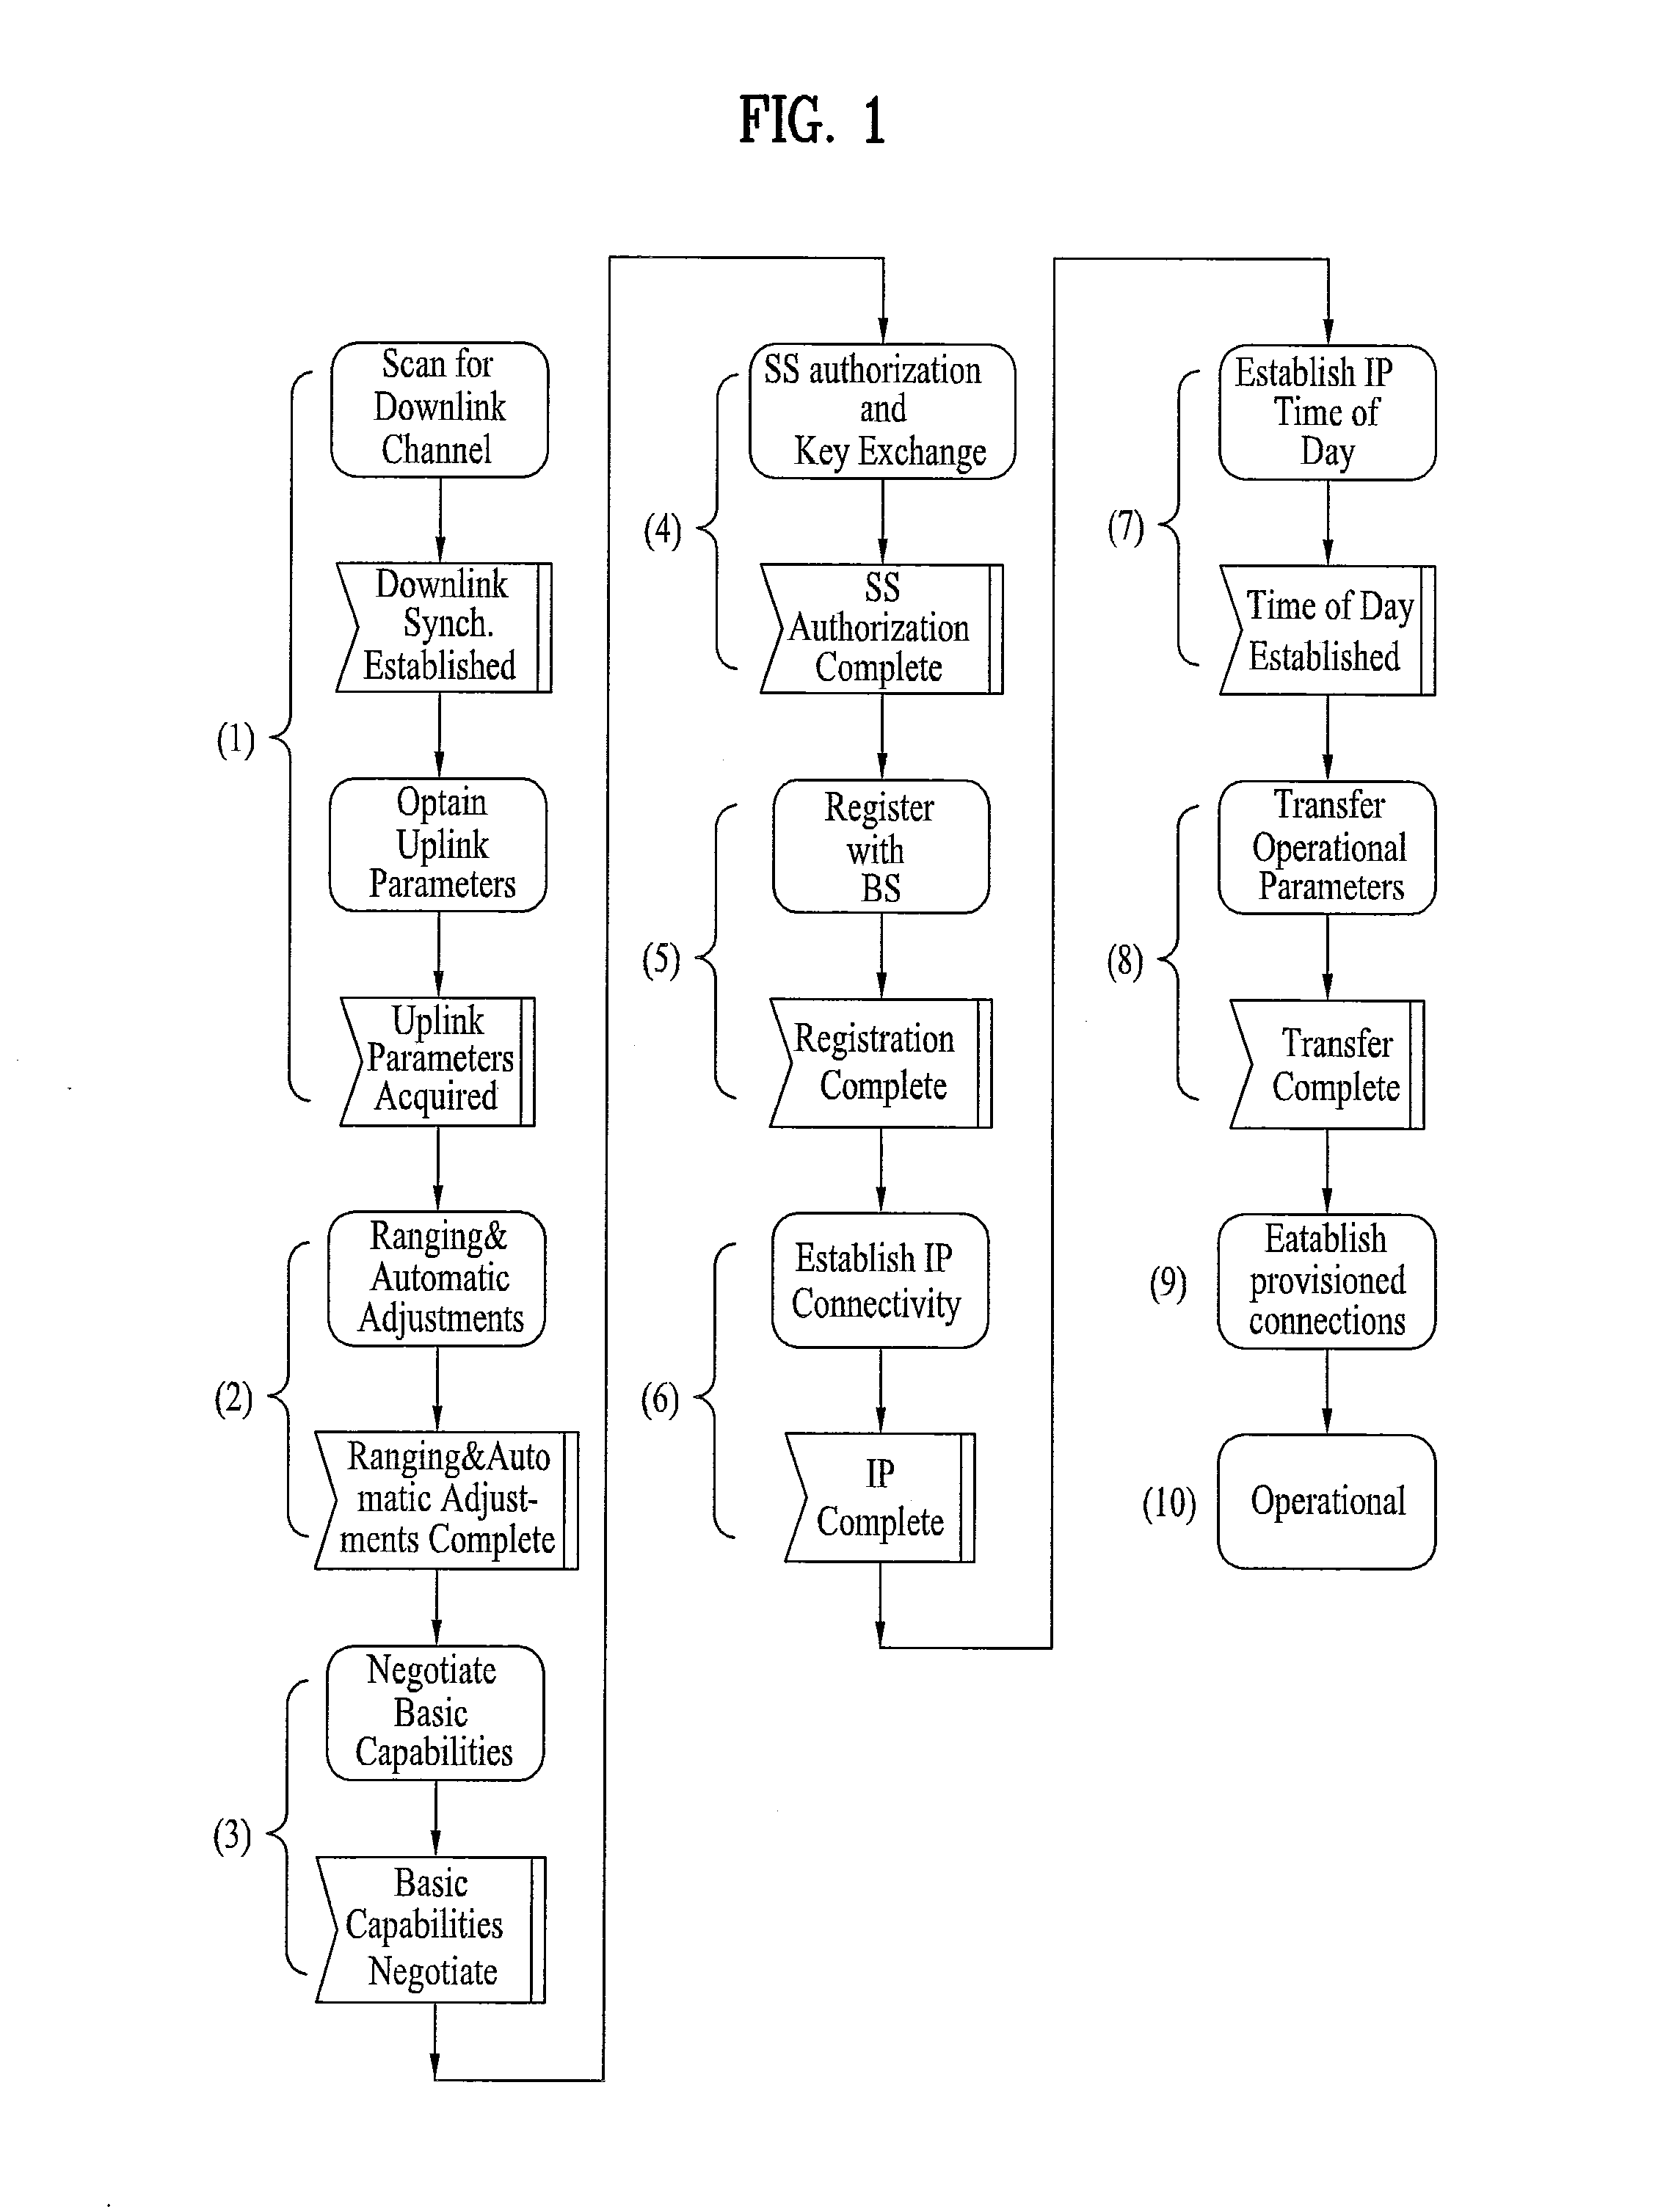 Ranging structure, multiplexing method and signaling method for legacy support mode